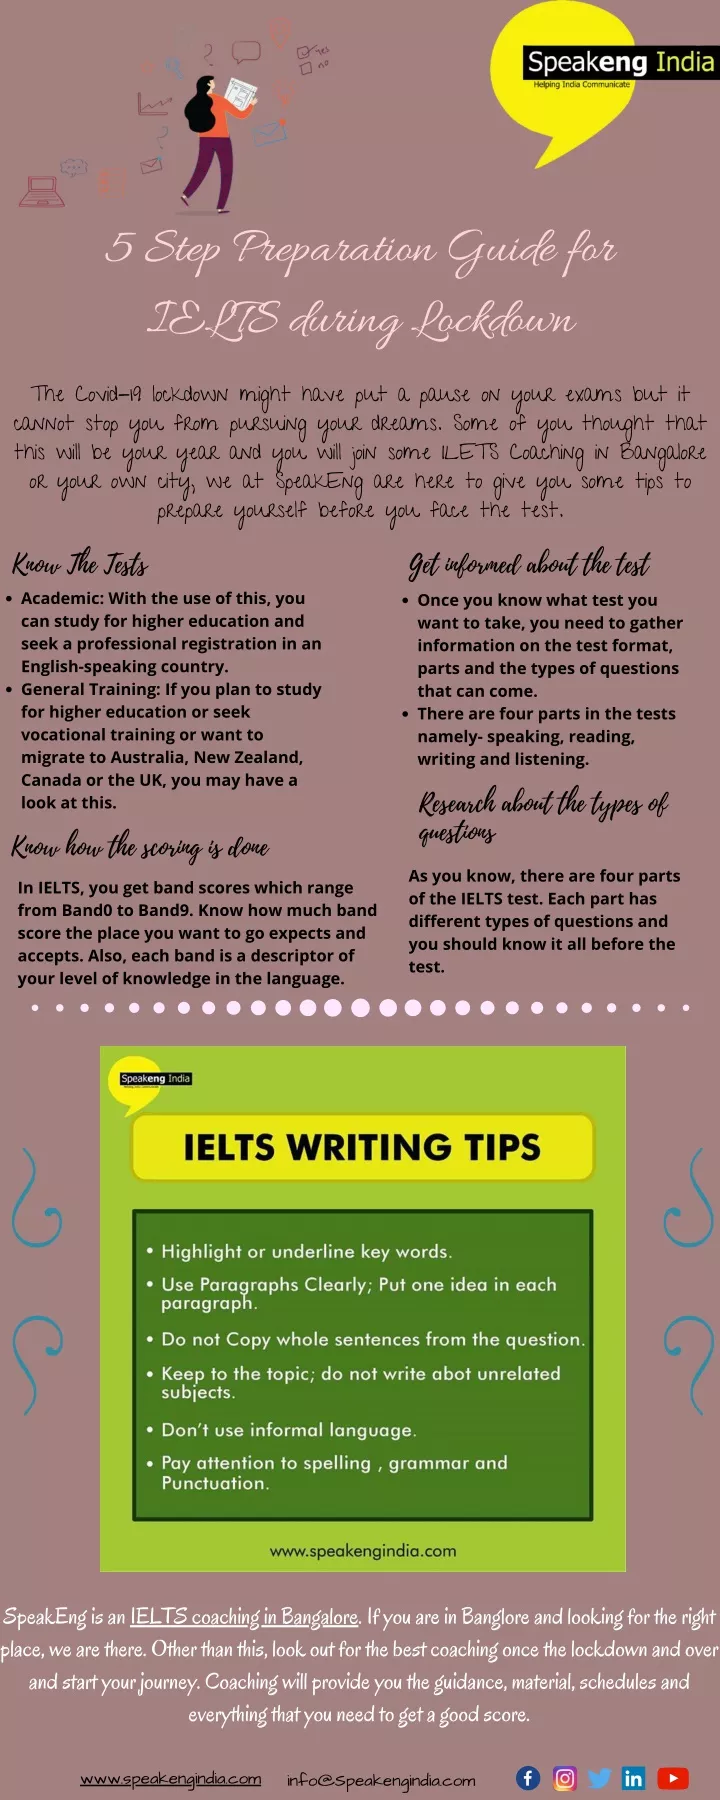 5 step preparation guide for ielts during lockdown